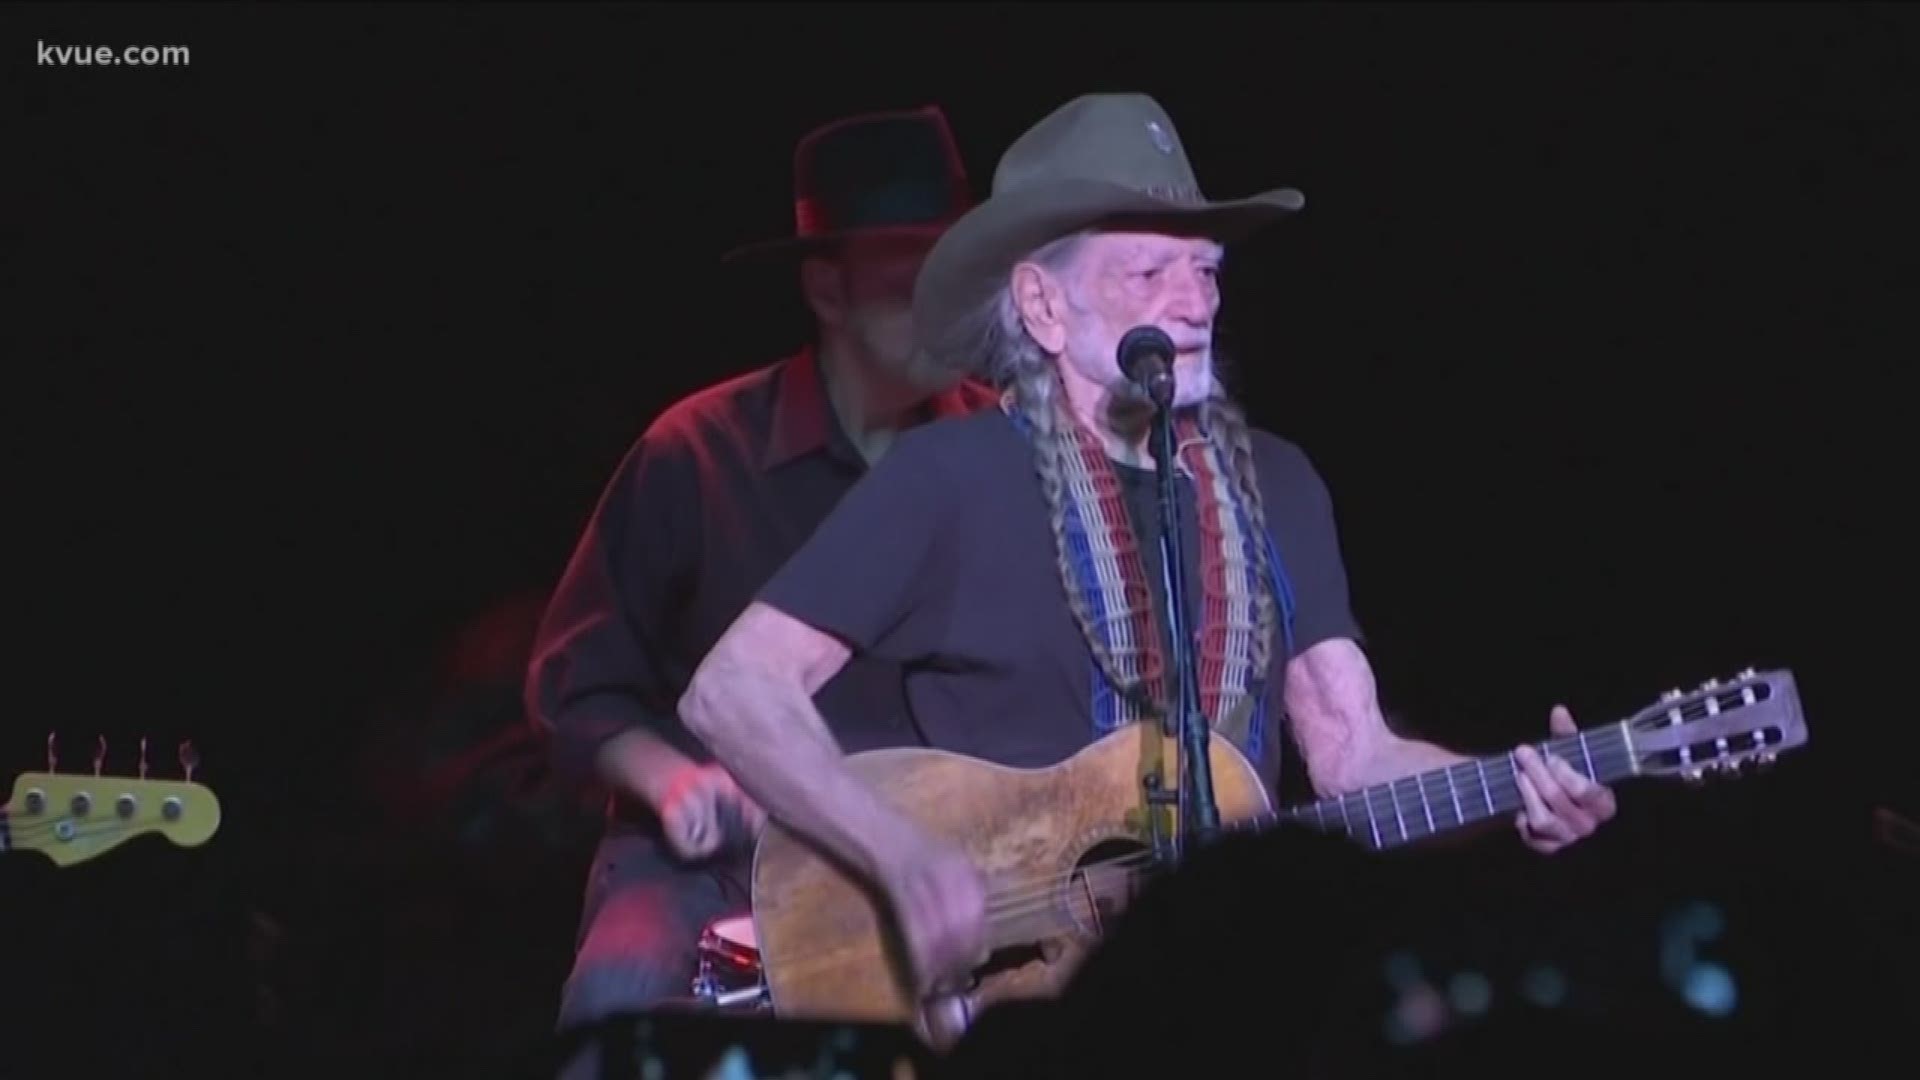 Willie Nelson said he'll be back on the road soon.